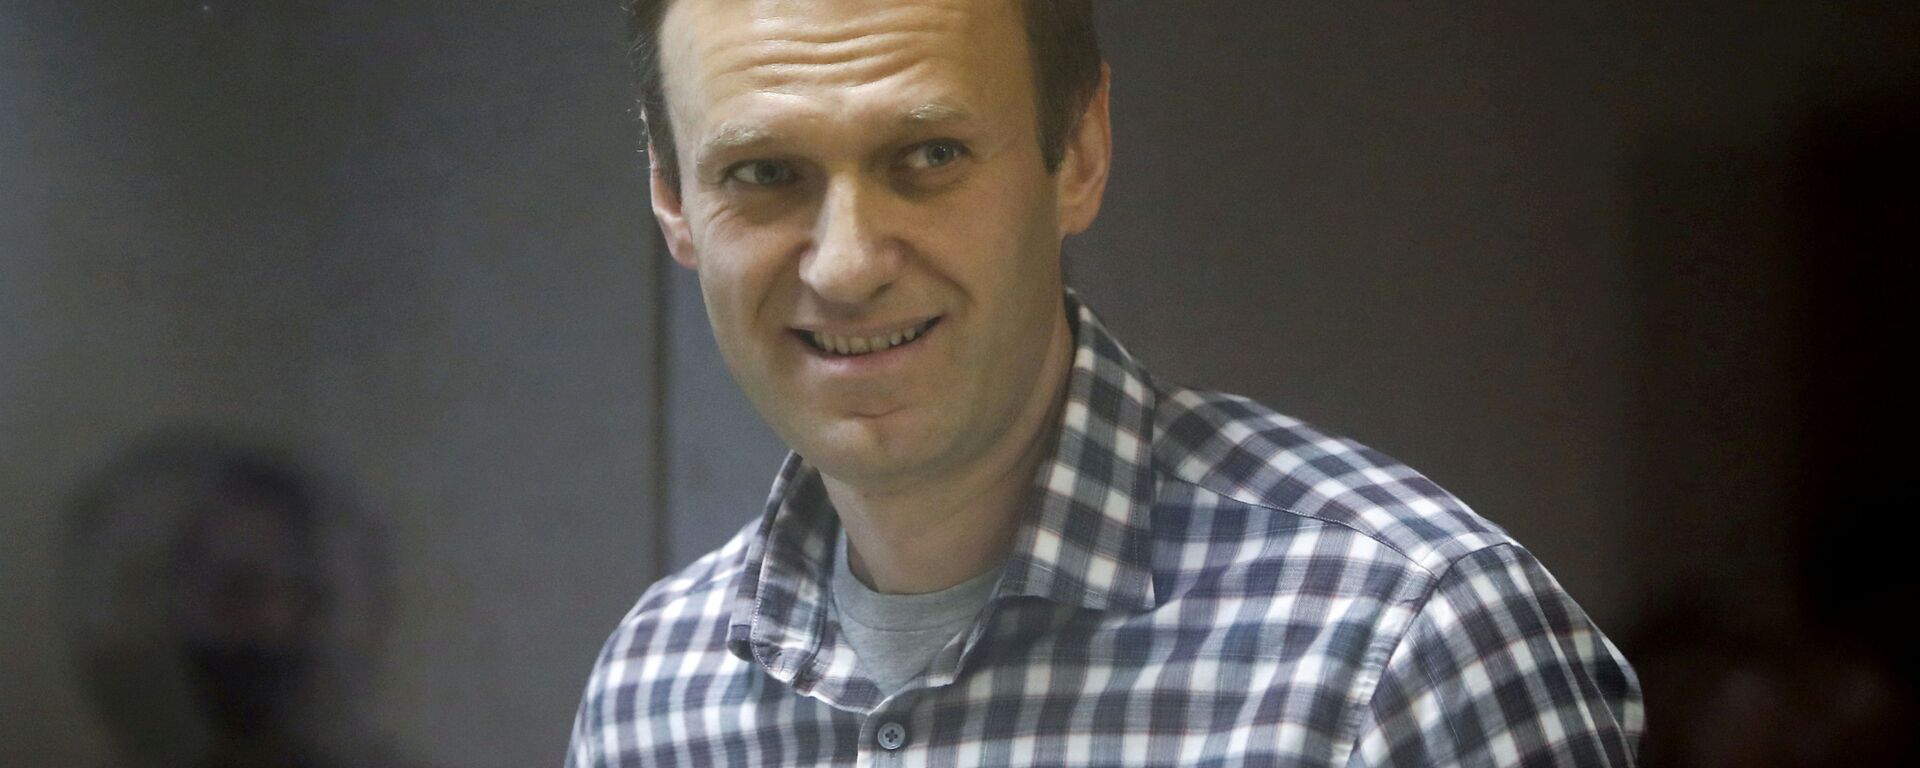  Russian opposition politician Alexei Navalny attends a court hearing in Moscow, Russia February 20, 2021 - Sputnik International, 1920, 26.04.2021